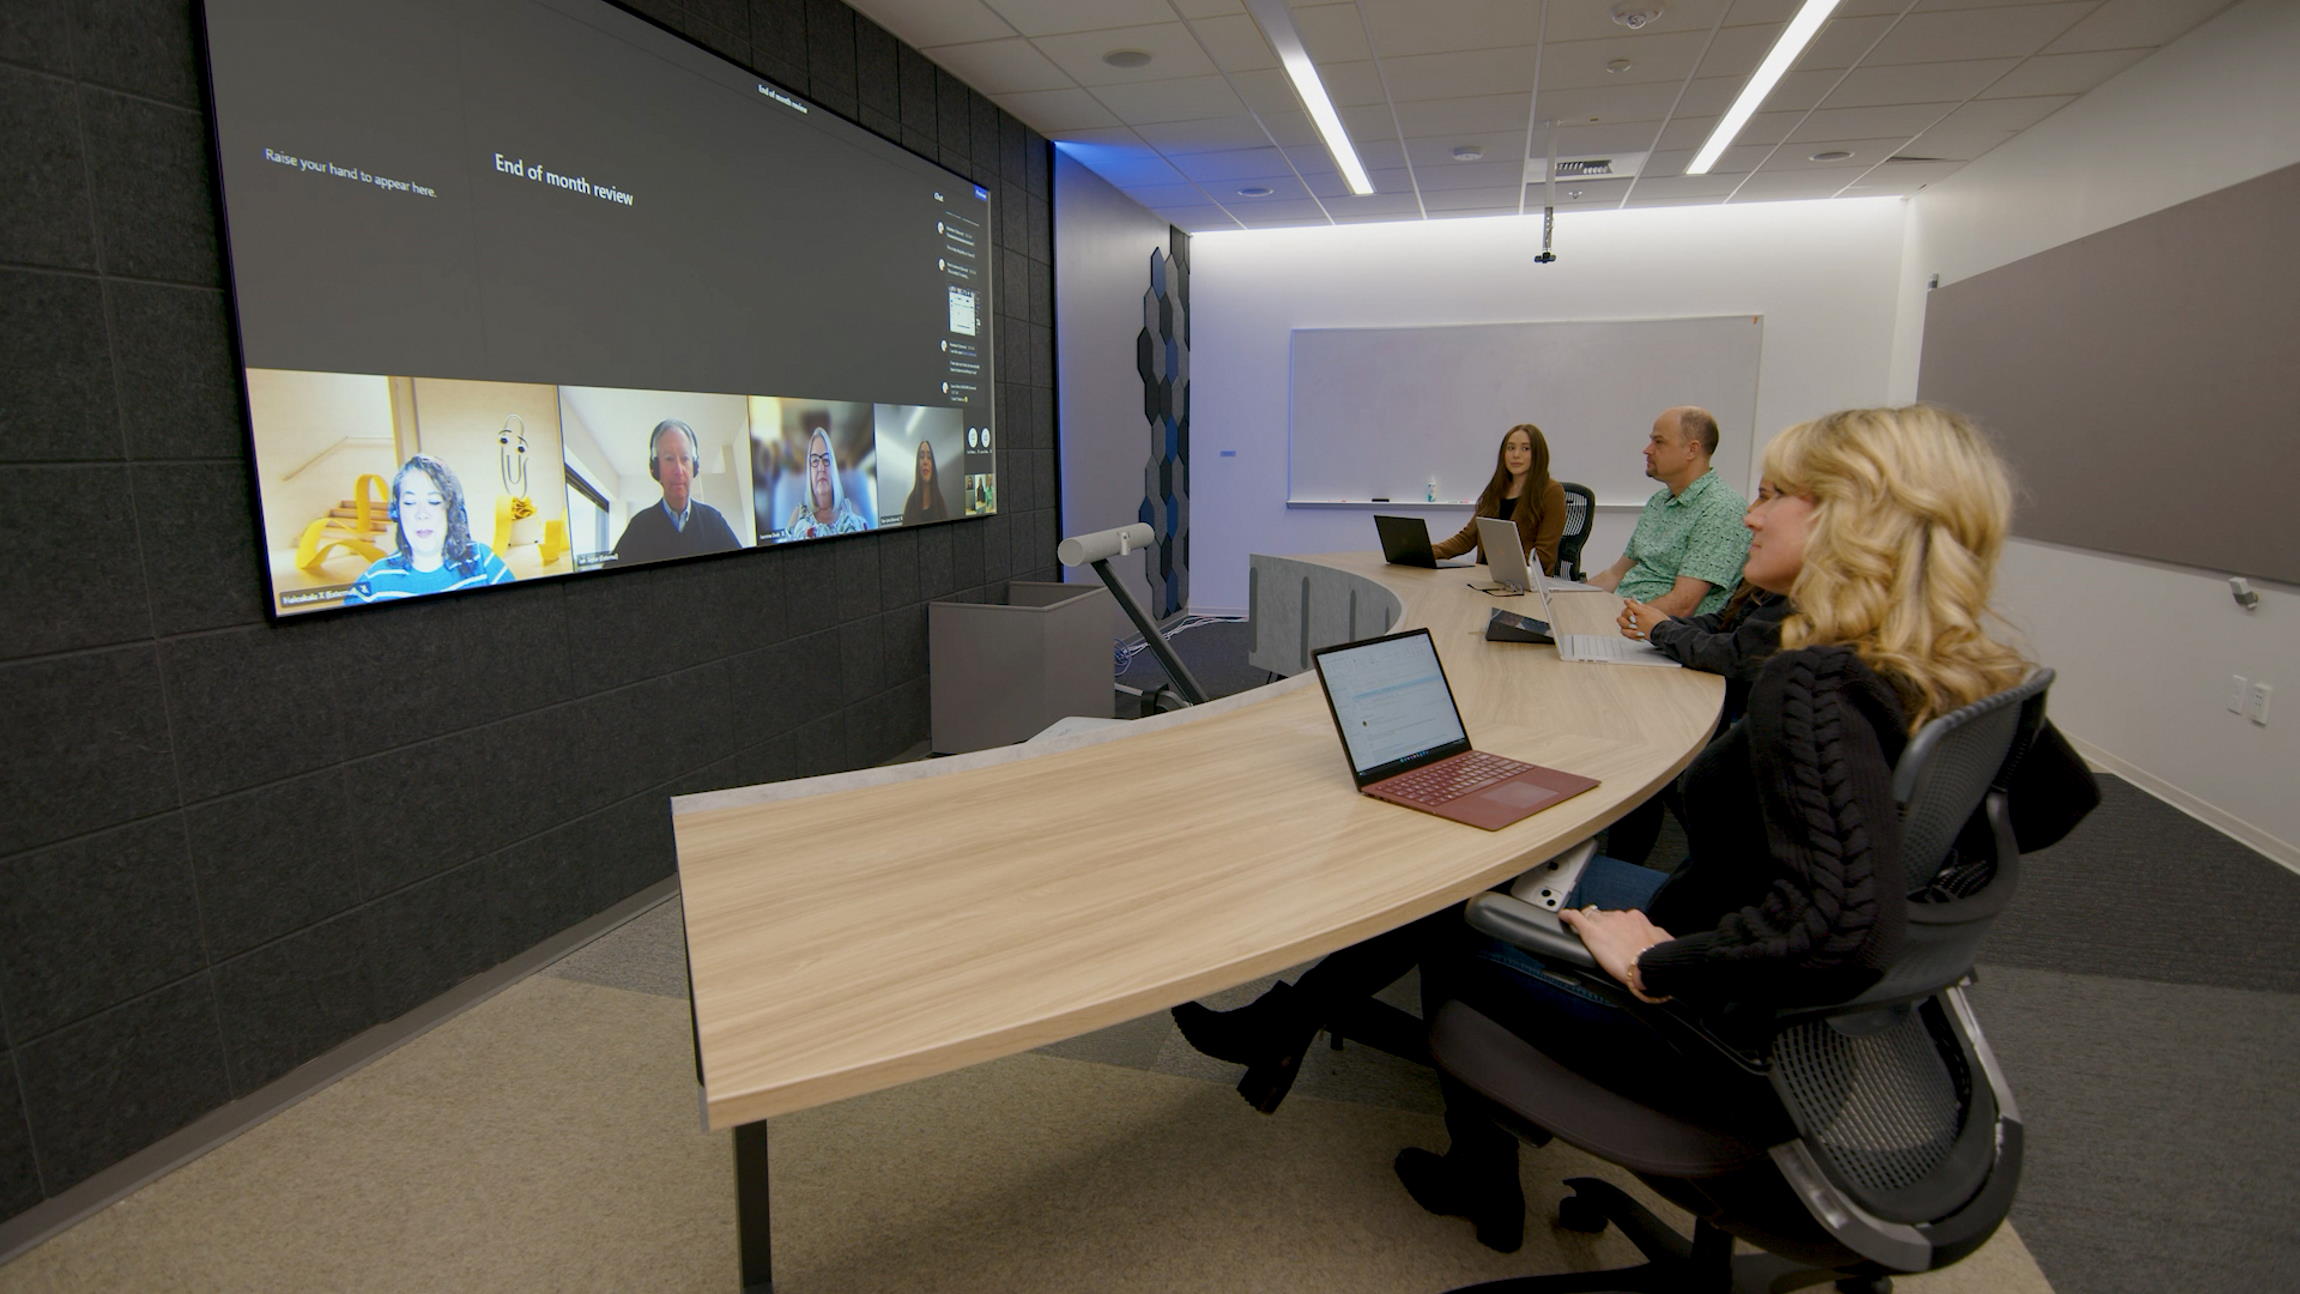 A cloud engineer collaborating with a team through video conferencing.